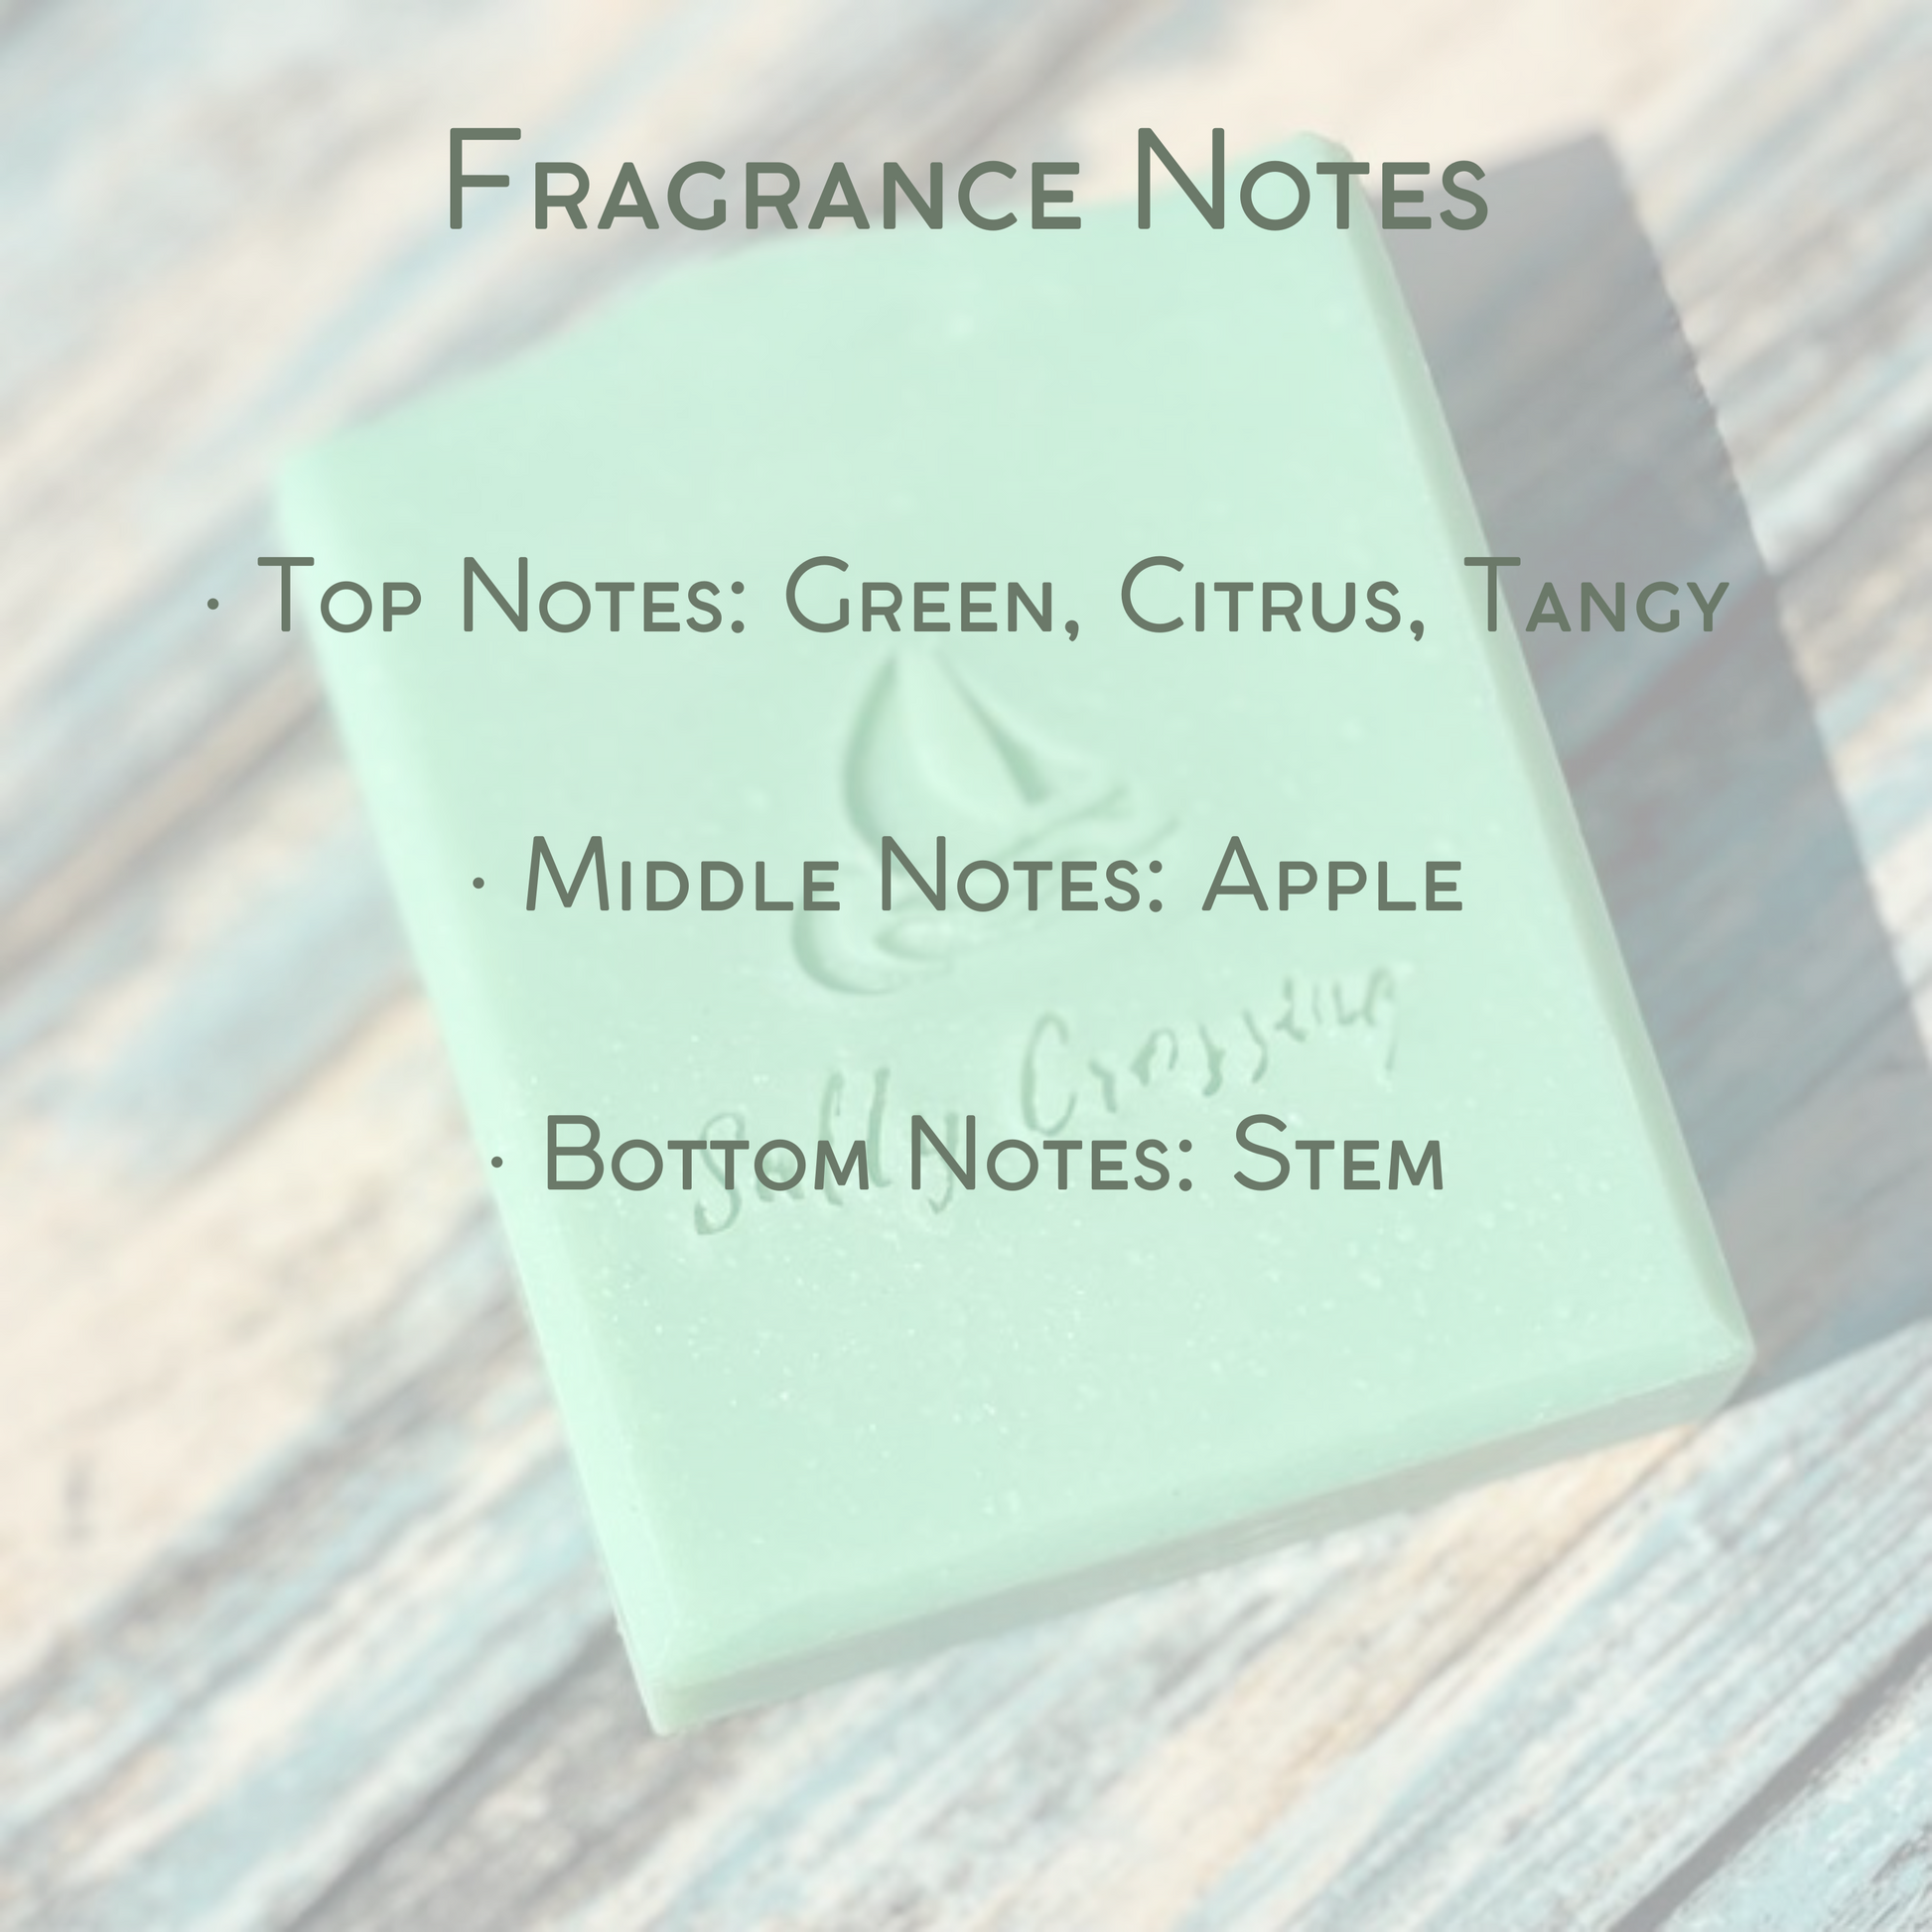 fragrance notes. top notes green, citrus, tangy. middle notes apple. bottom notes stem. graphic.